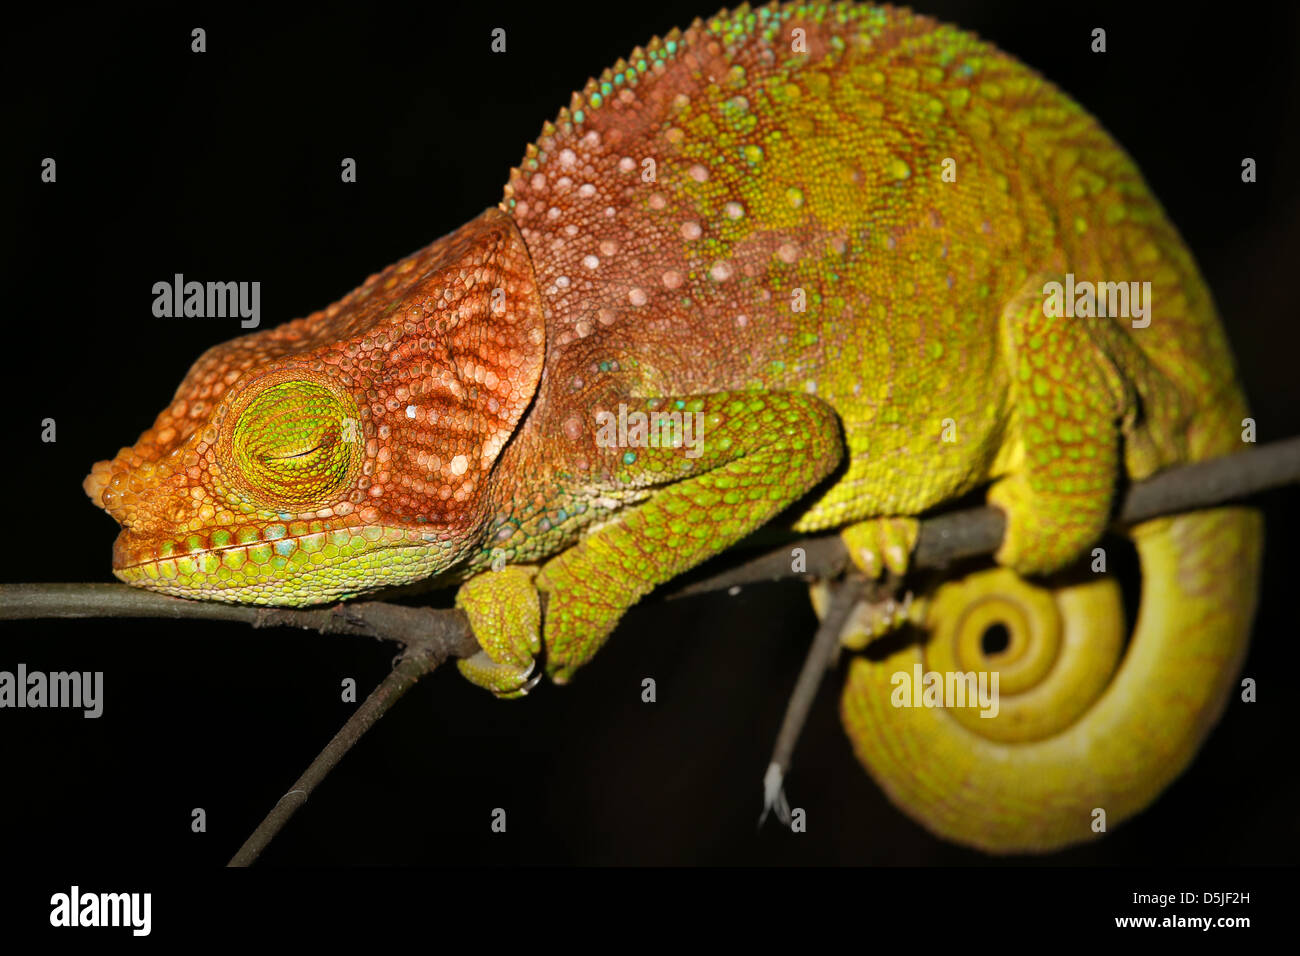 ENDANGERED O'Shaughnessy's Chameleon (Calumma oshaughnessyi) in the Ranomafana Rain Forests of Madagascar. Listed as Vulnerable. Stock Photo